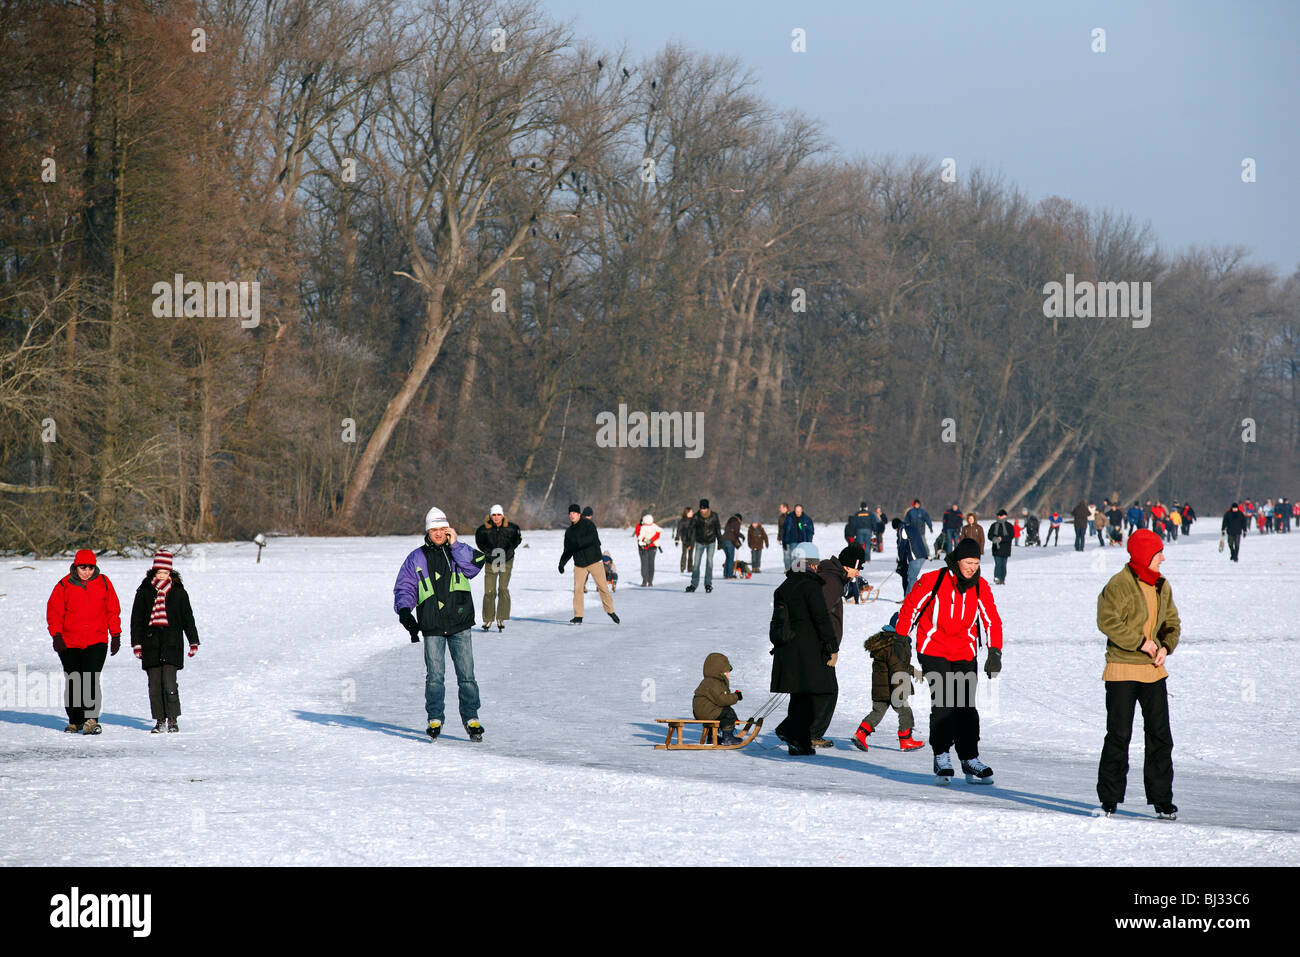 Ice skaters skating on the frozen lake at Overmere Donk in winter ...